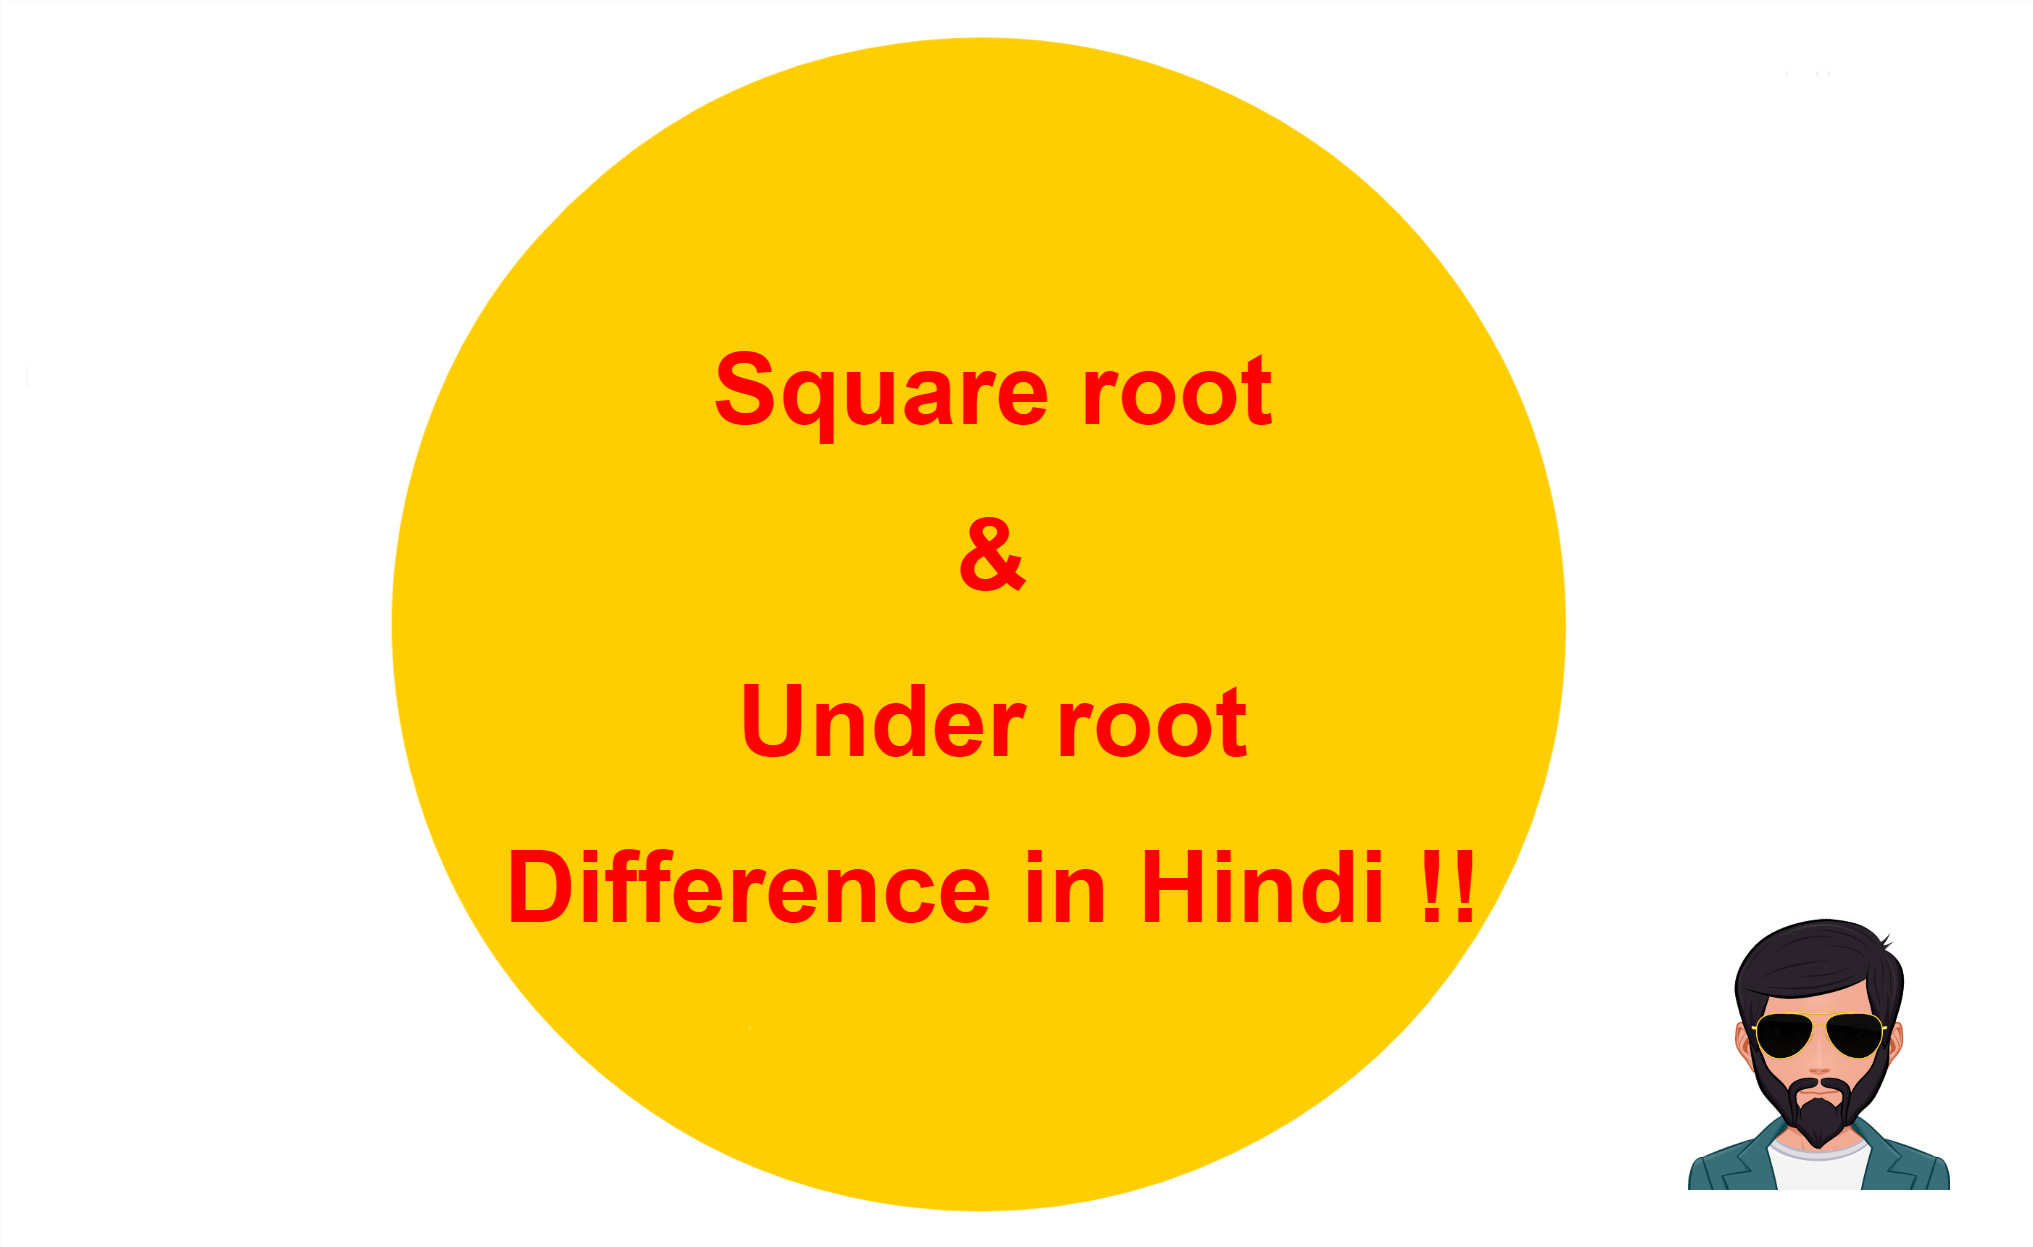 You are currently viewing Square root & Under root Difference in Hindi !!